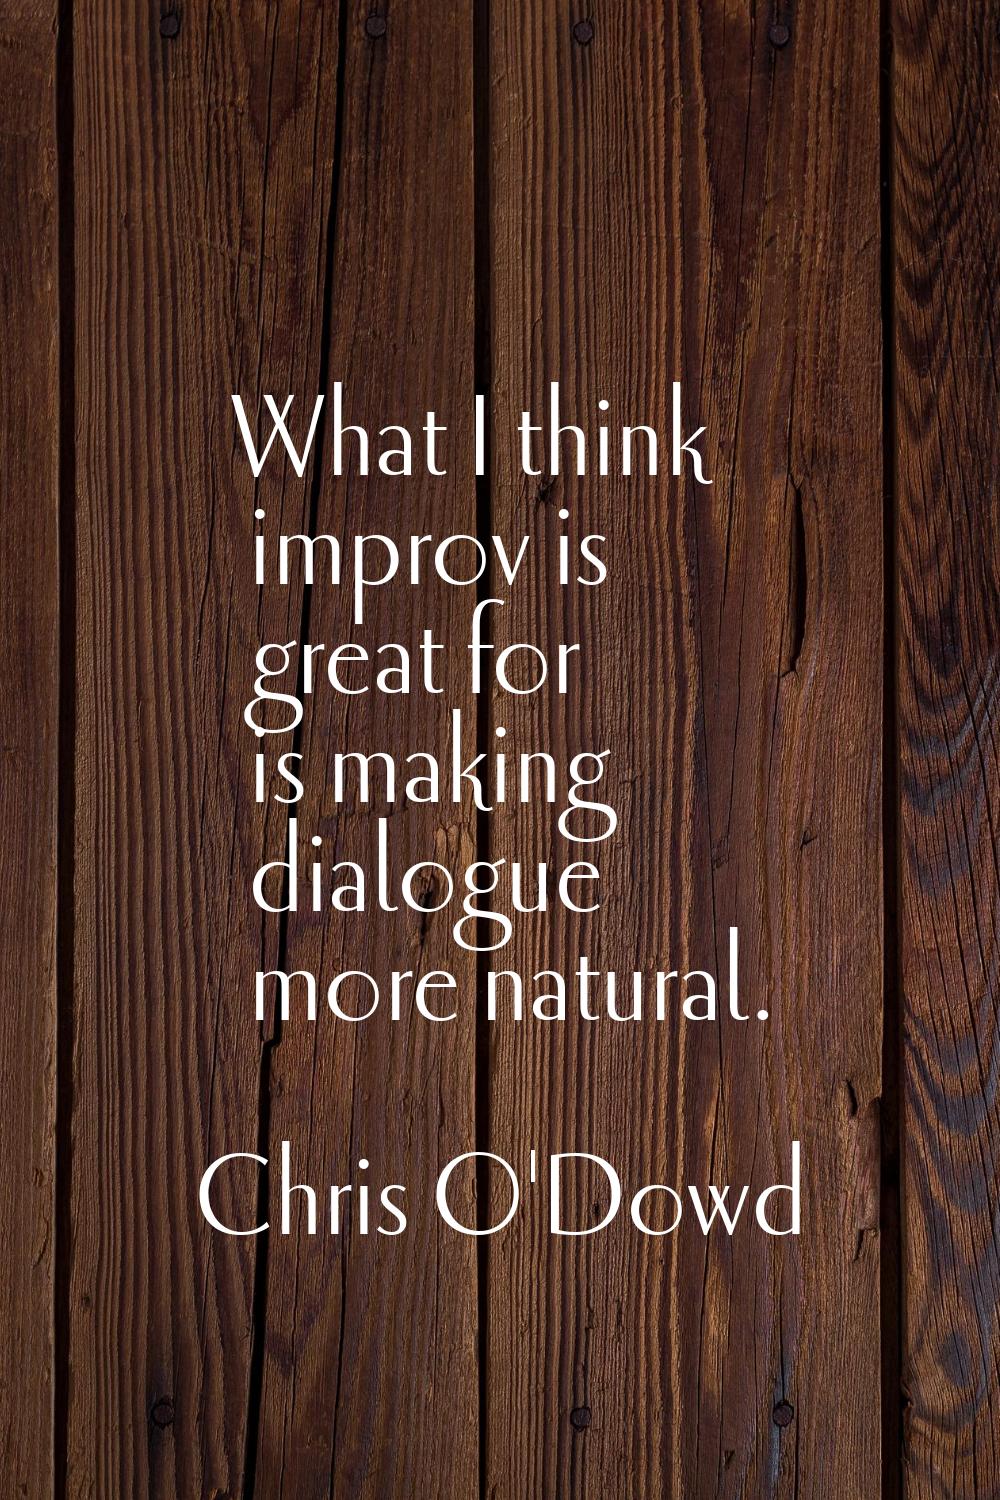 What I think improv is great for is making dialogue more natural.